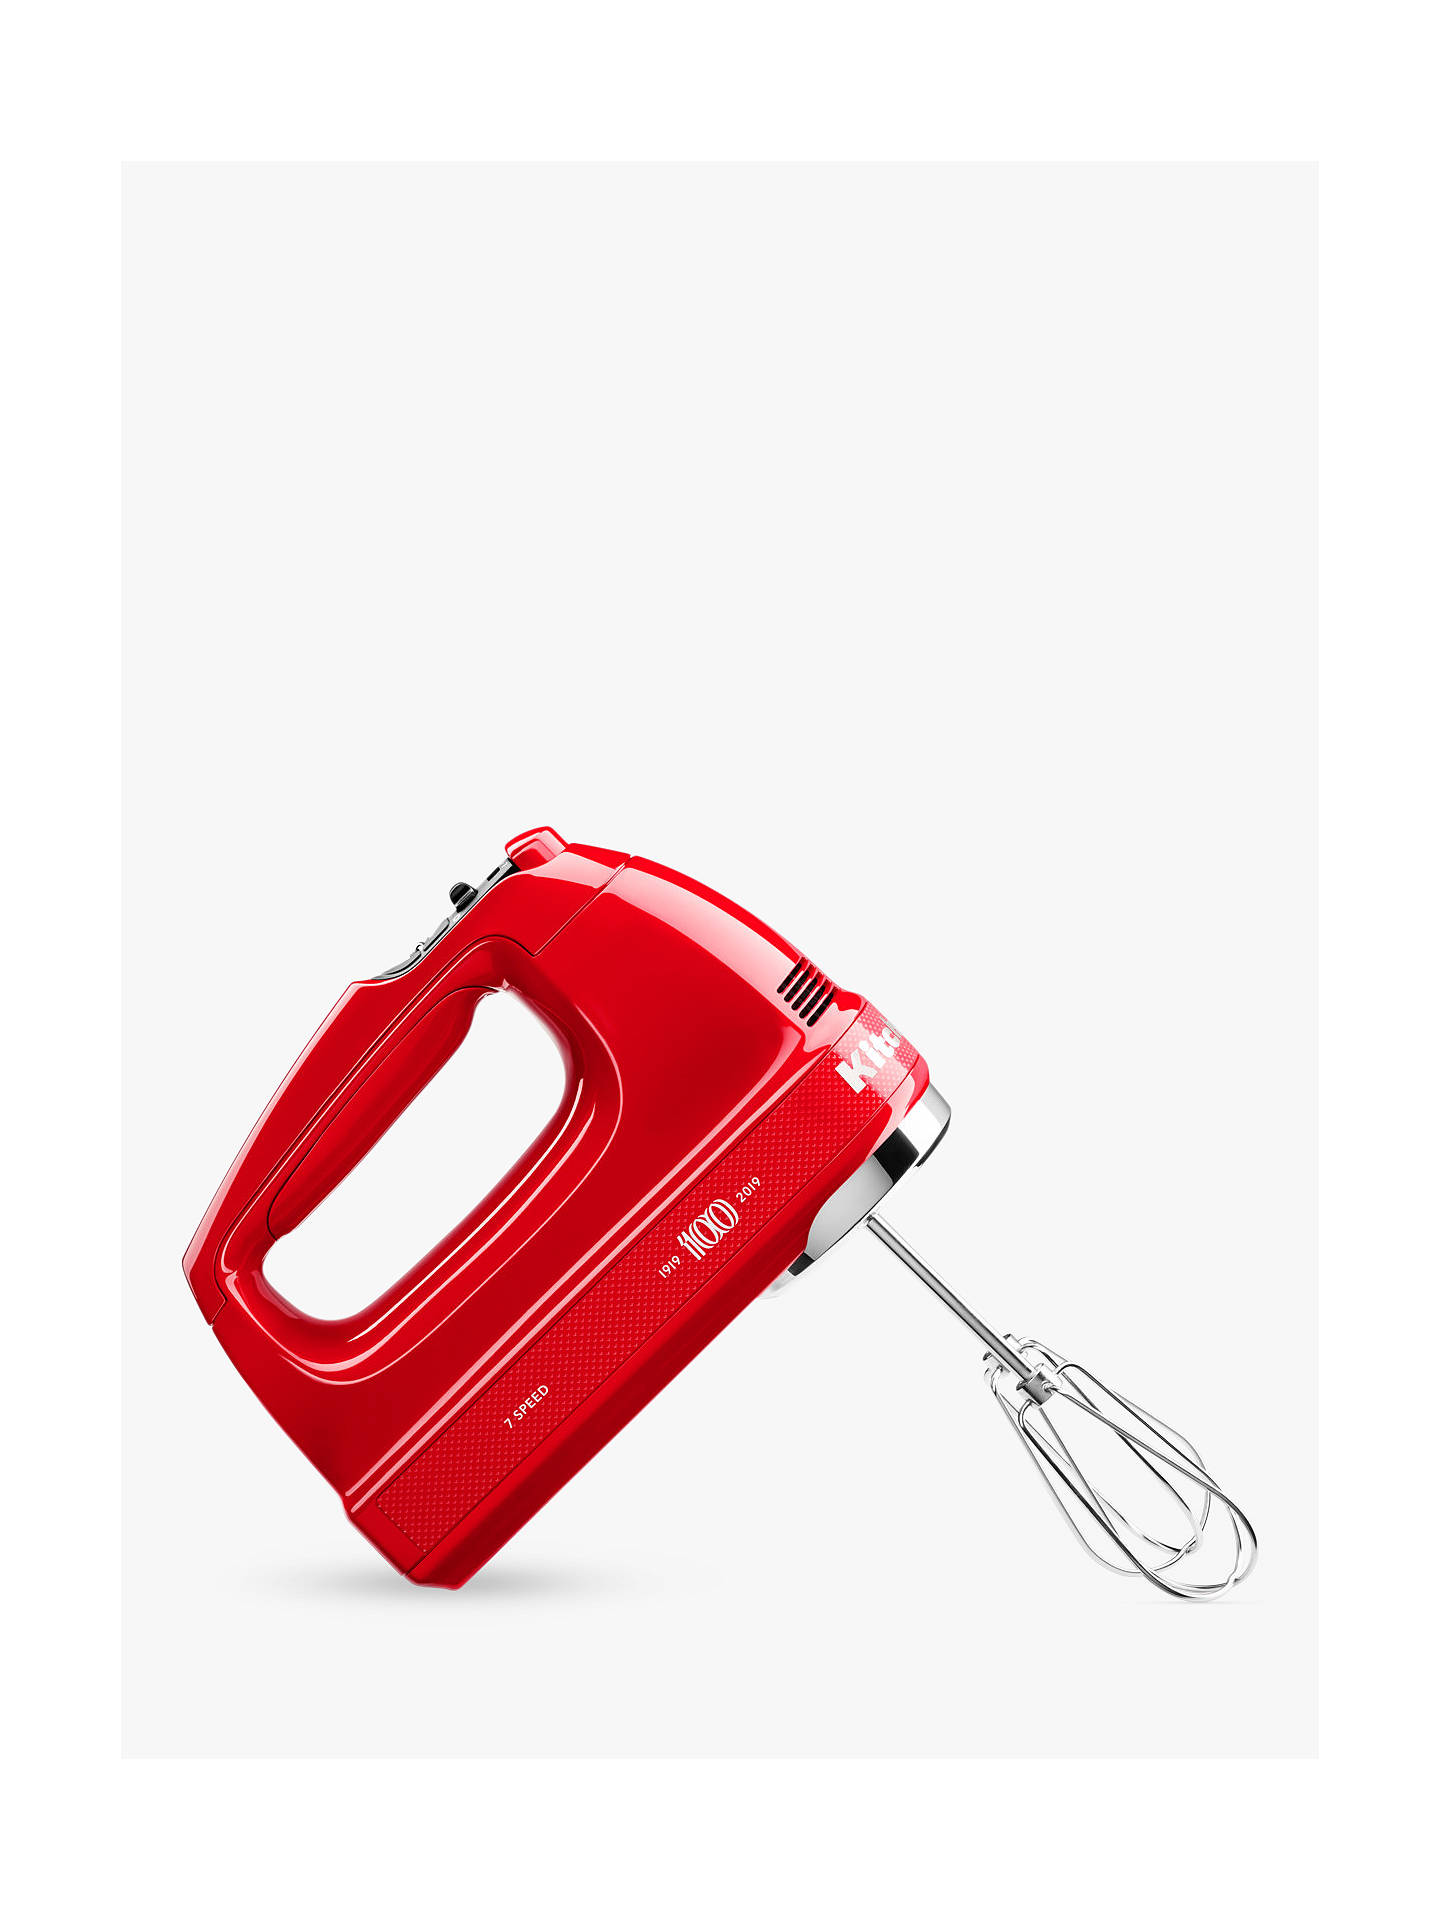 KitchenAid Queen of Hearts Hand Mixer, Red at John Lewis & Partners